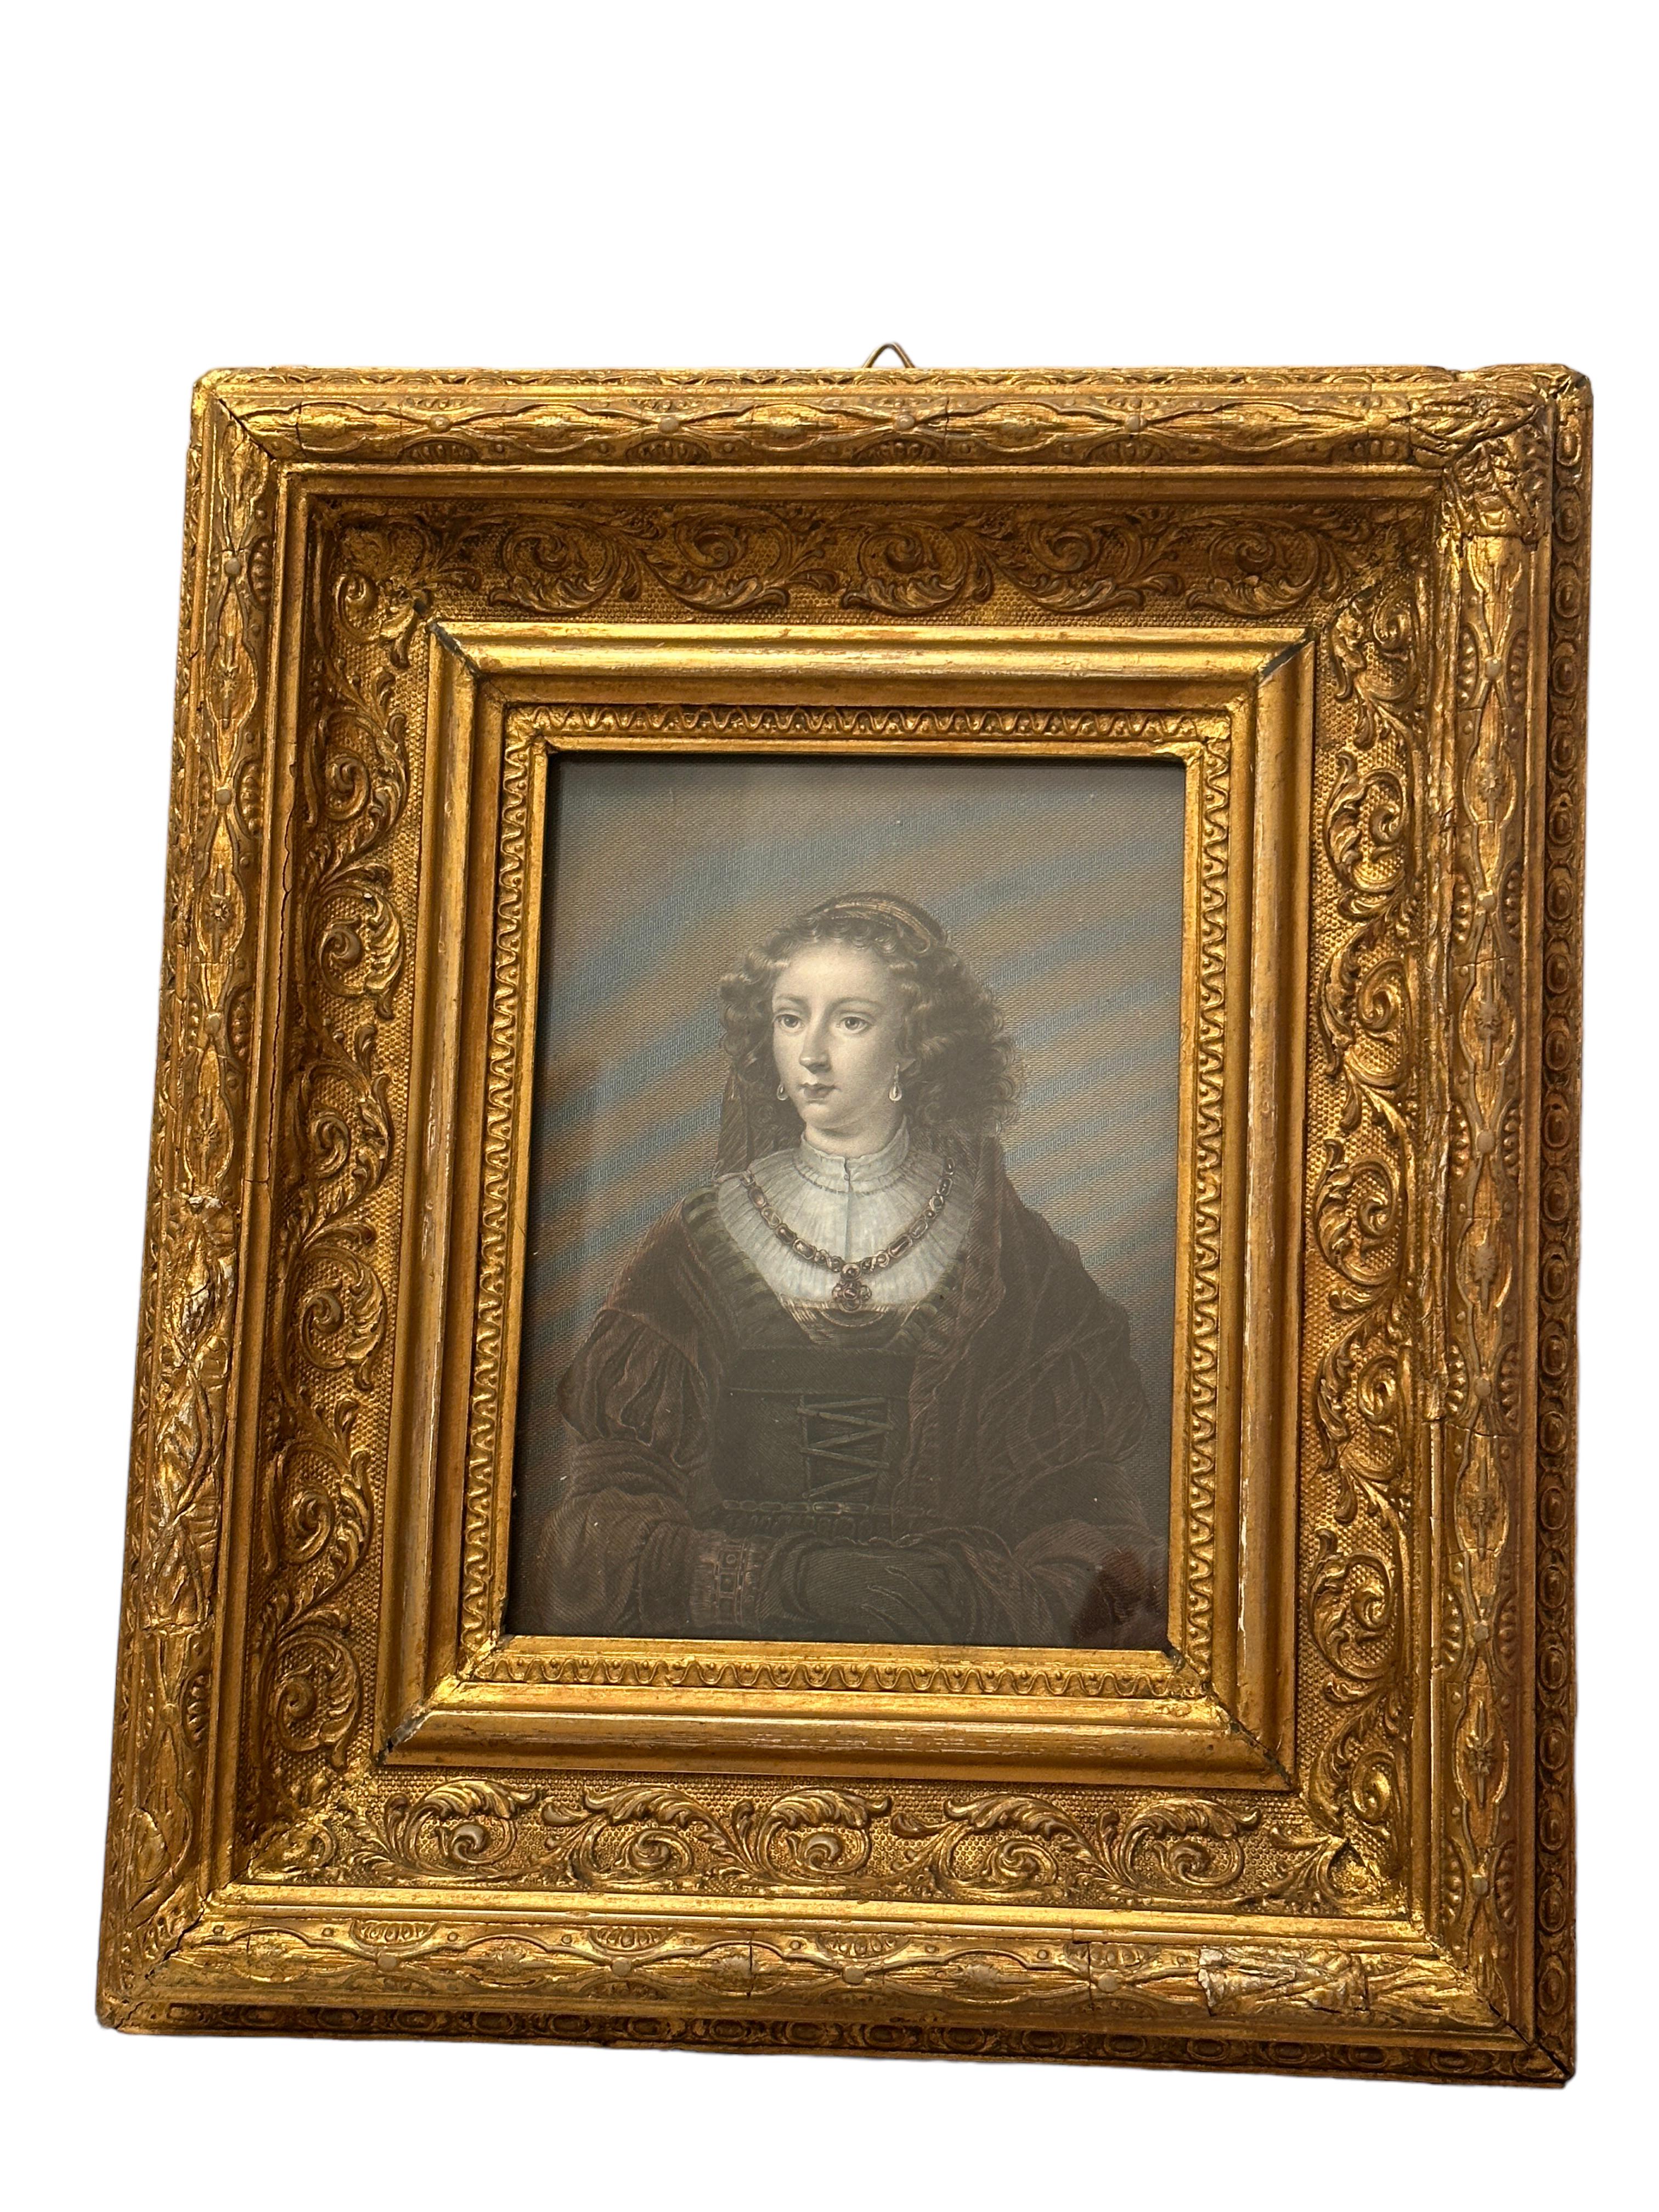 Hand-Crafted Framed German Hand Colored Stealing Engraving Portrait of a Noble Lady, 1840s For Sale